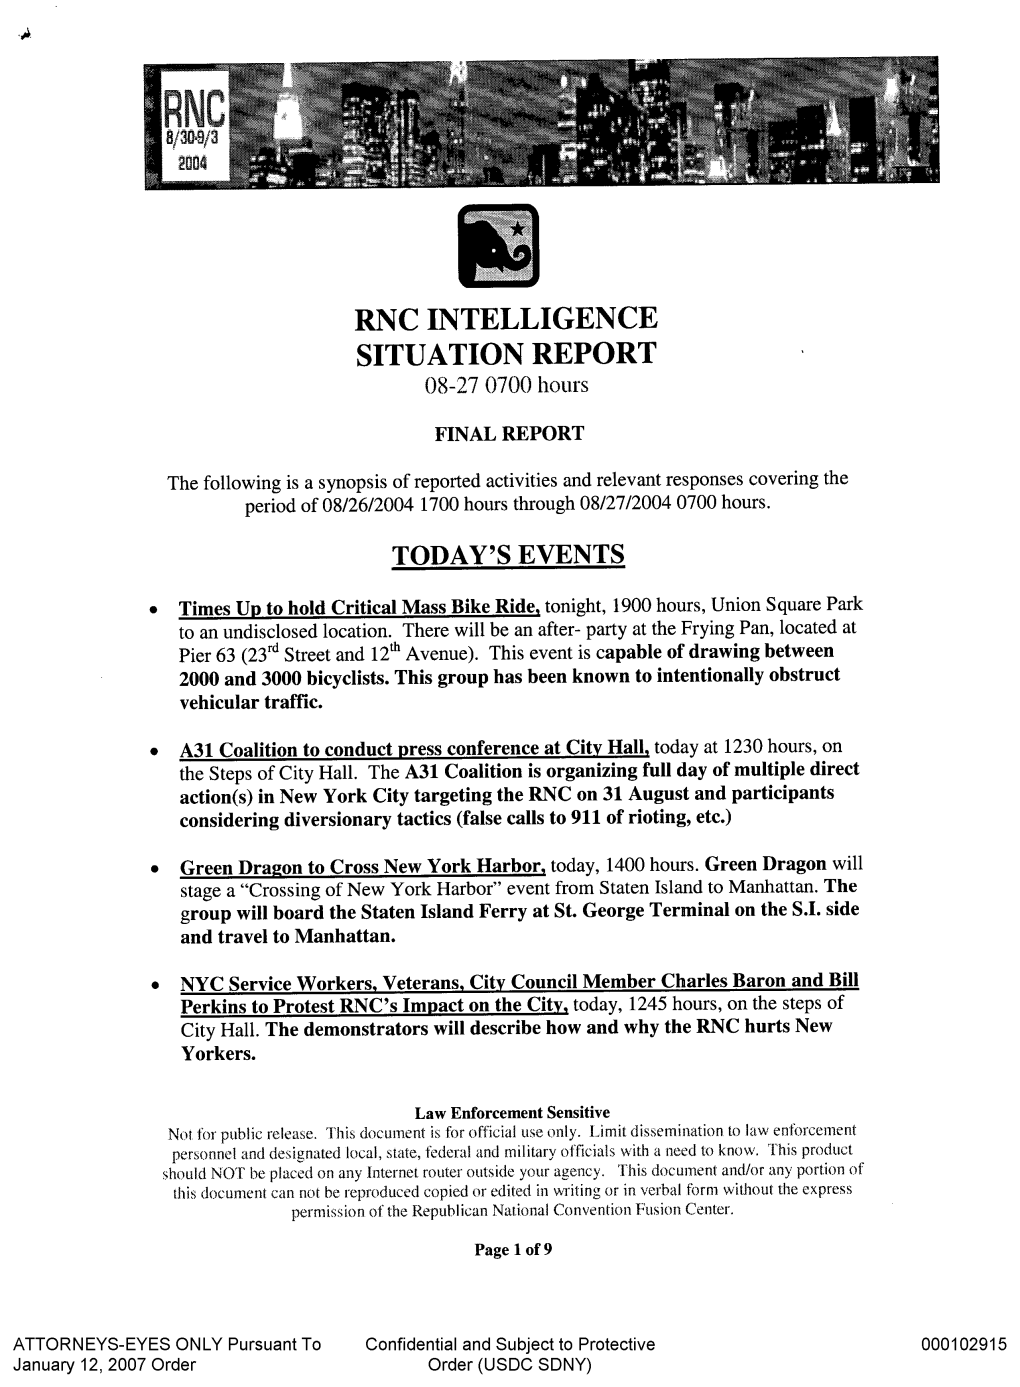 RNC INTELLIGENCE SITUATION REPORT 08-27 0700 Hours